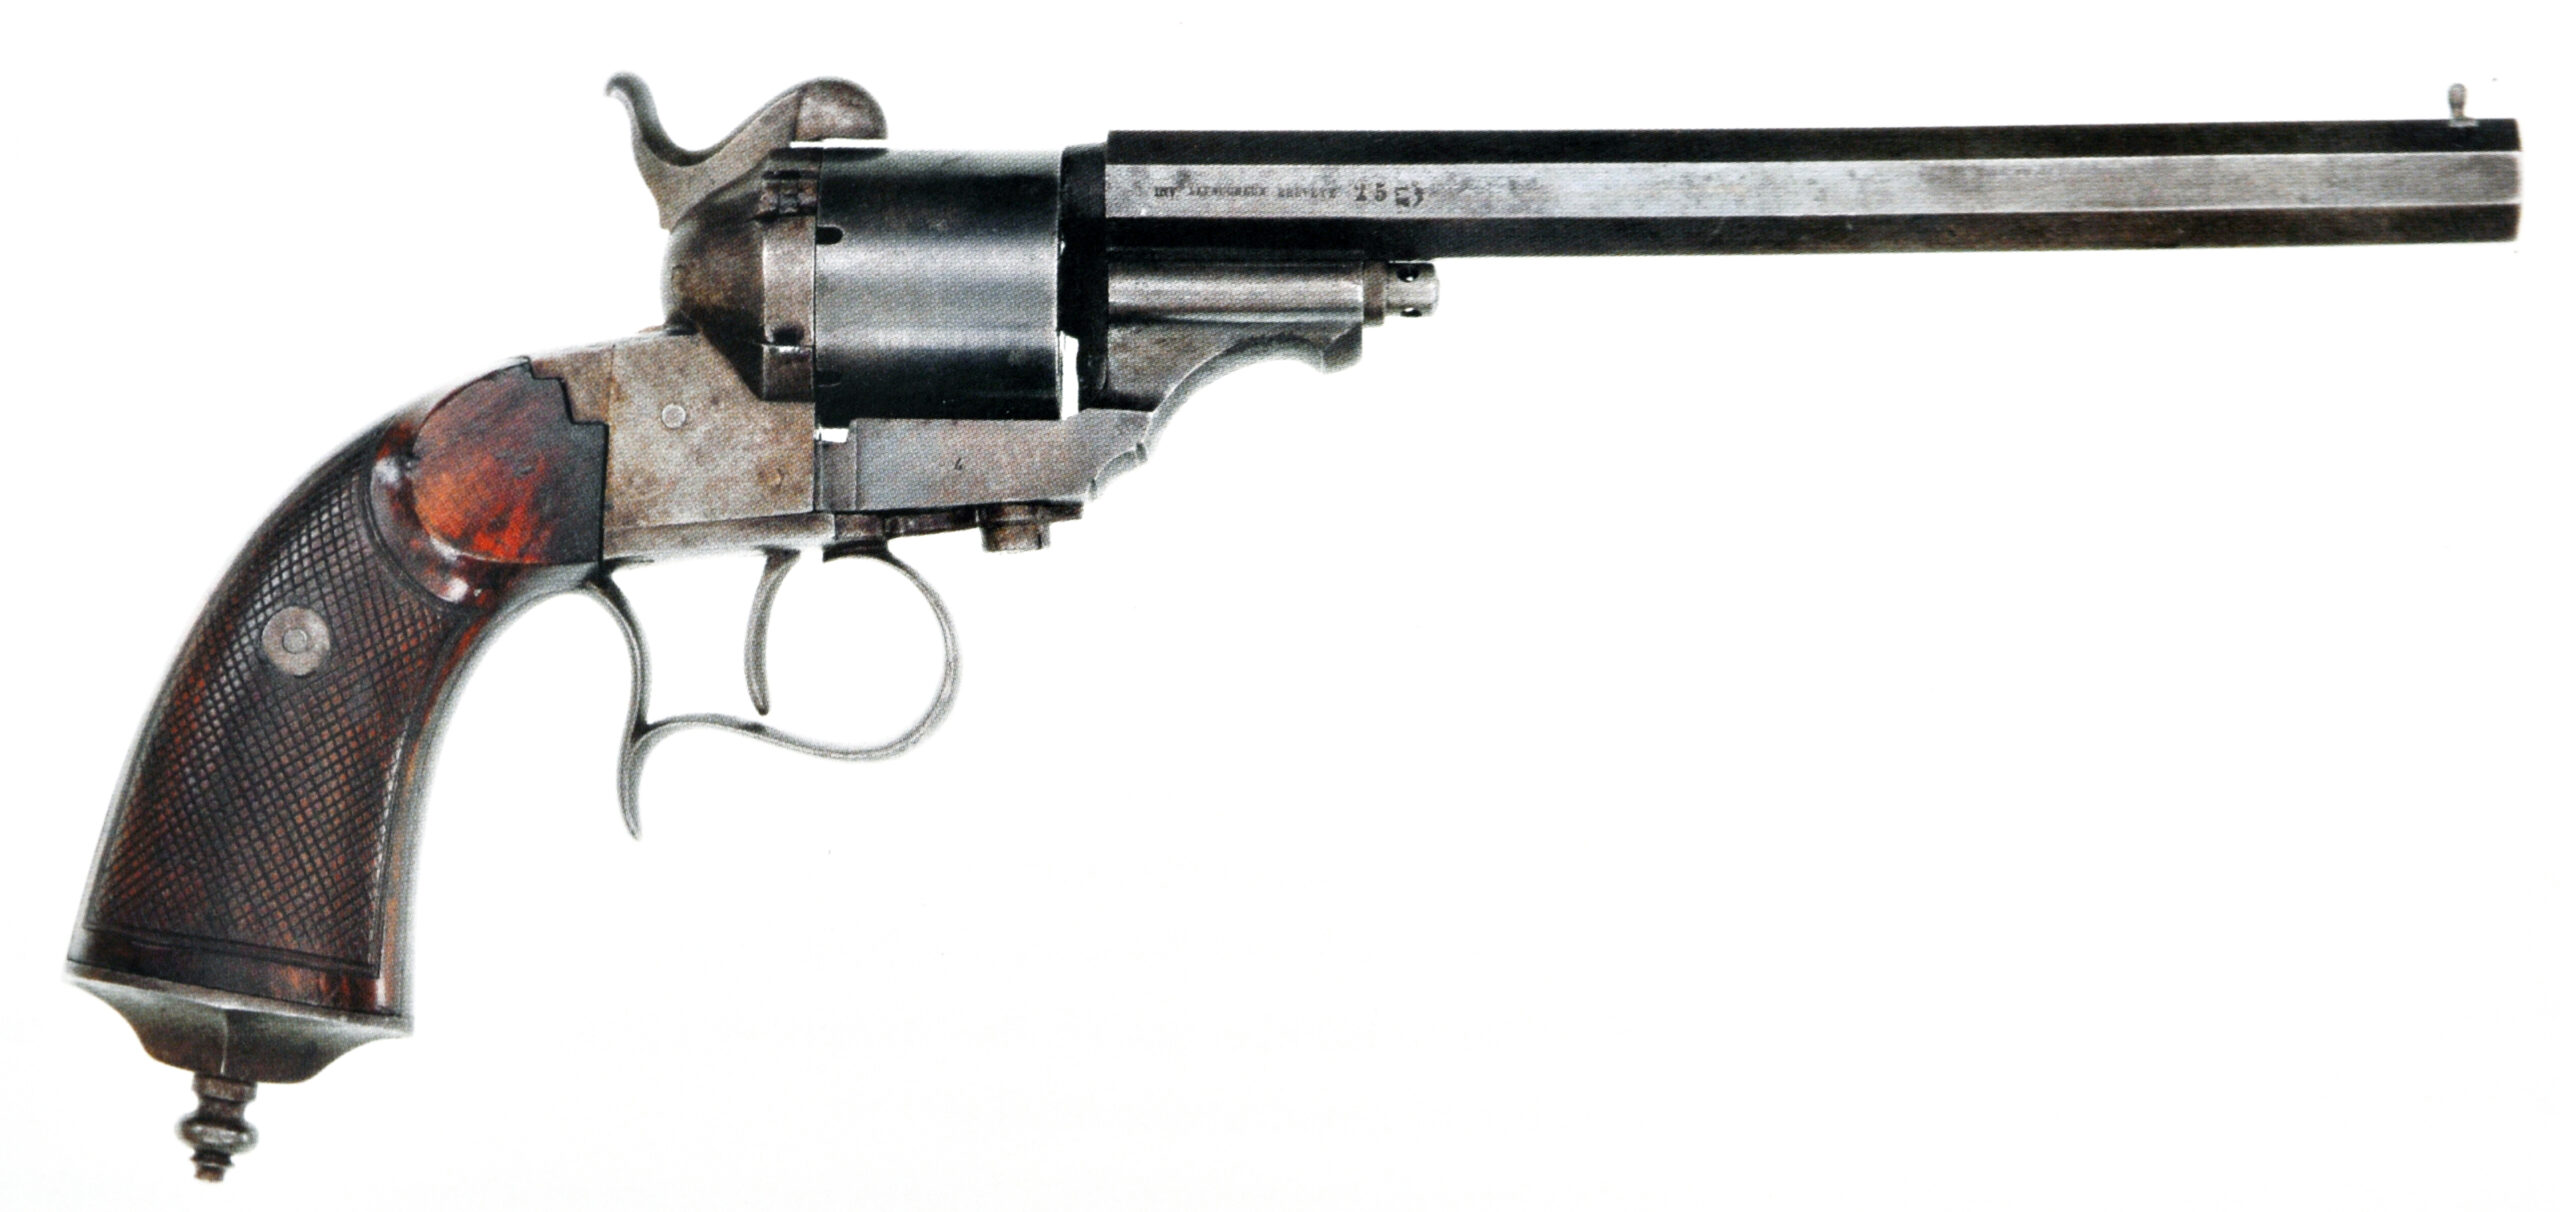 Lefaucheux LF 25 owned by Samuel Colt from the Connecticut Historical Museum